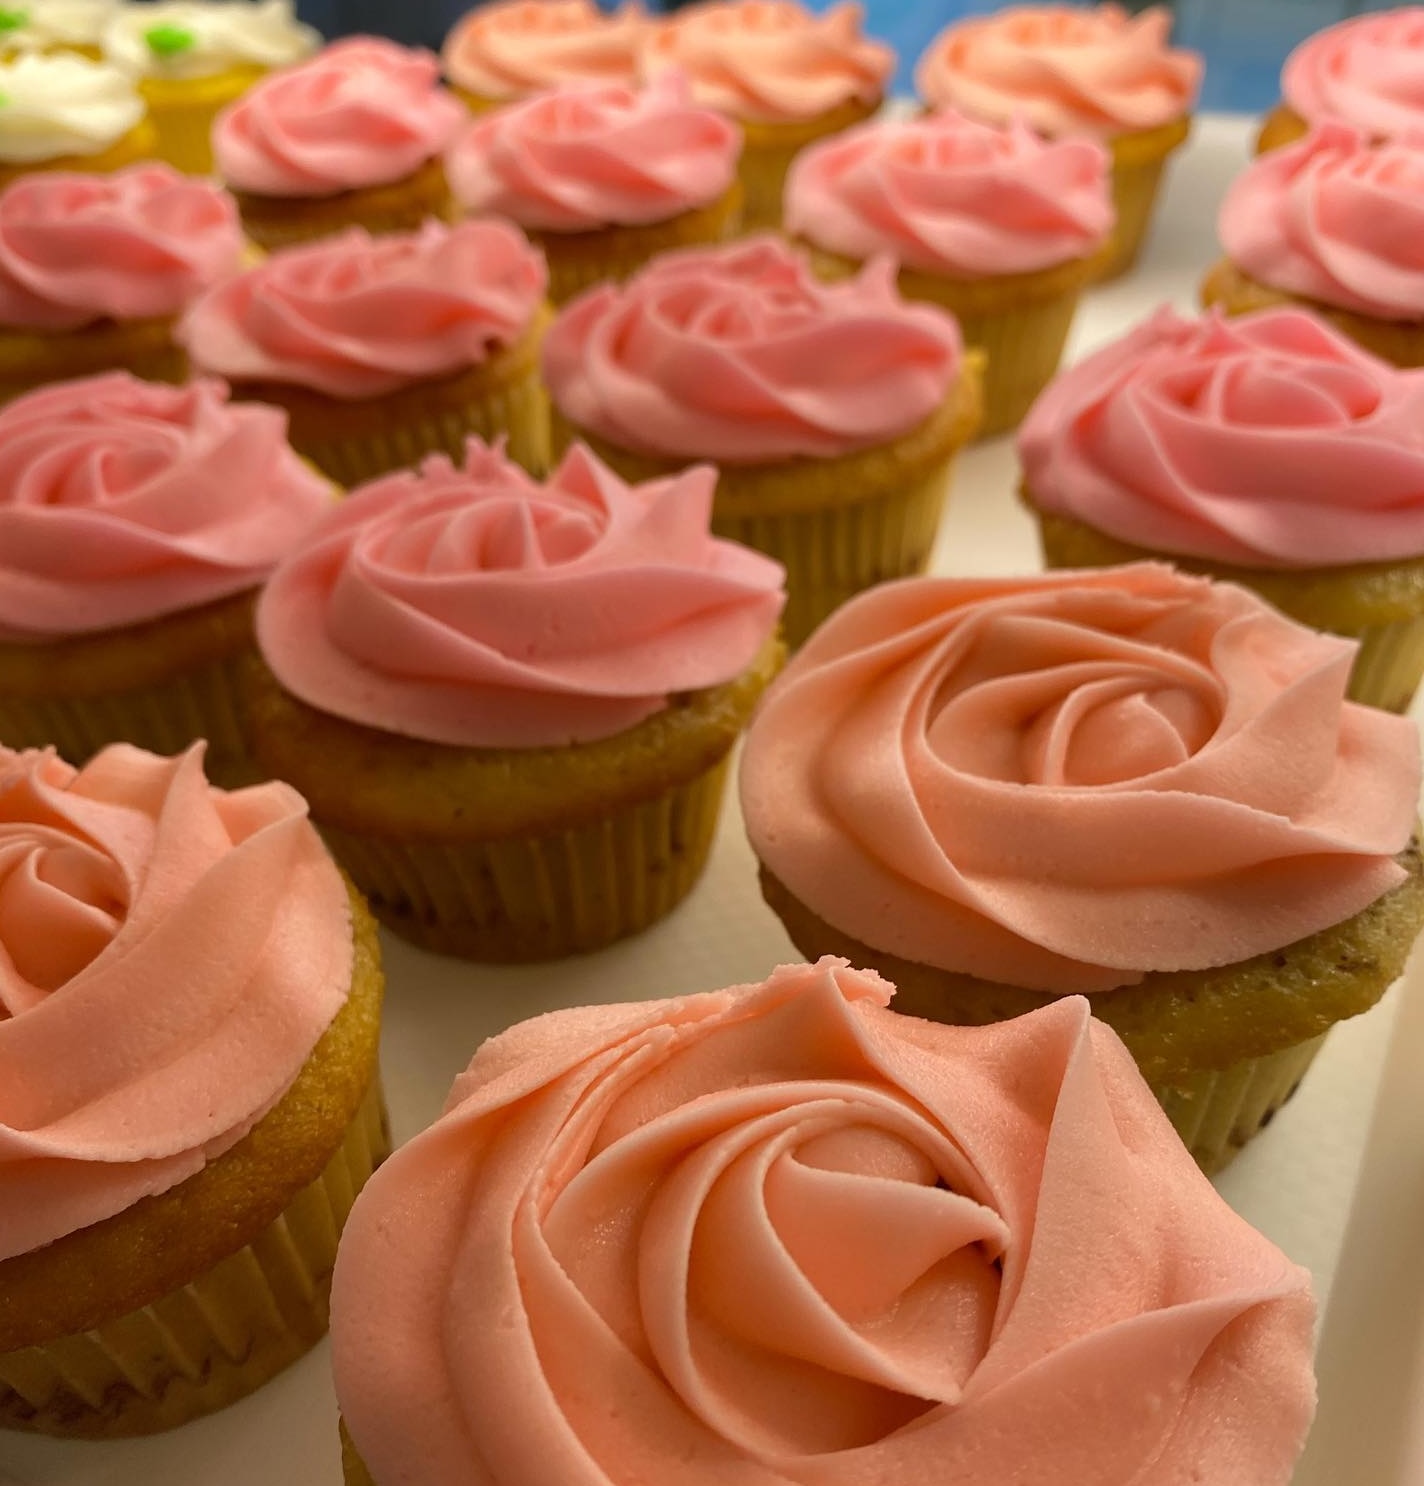 Persian Cupcakes from Milk and Water Baking Co. in Thunder Bay; rows of small, delicious looking cupcakes with rosettes of pink frosting.